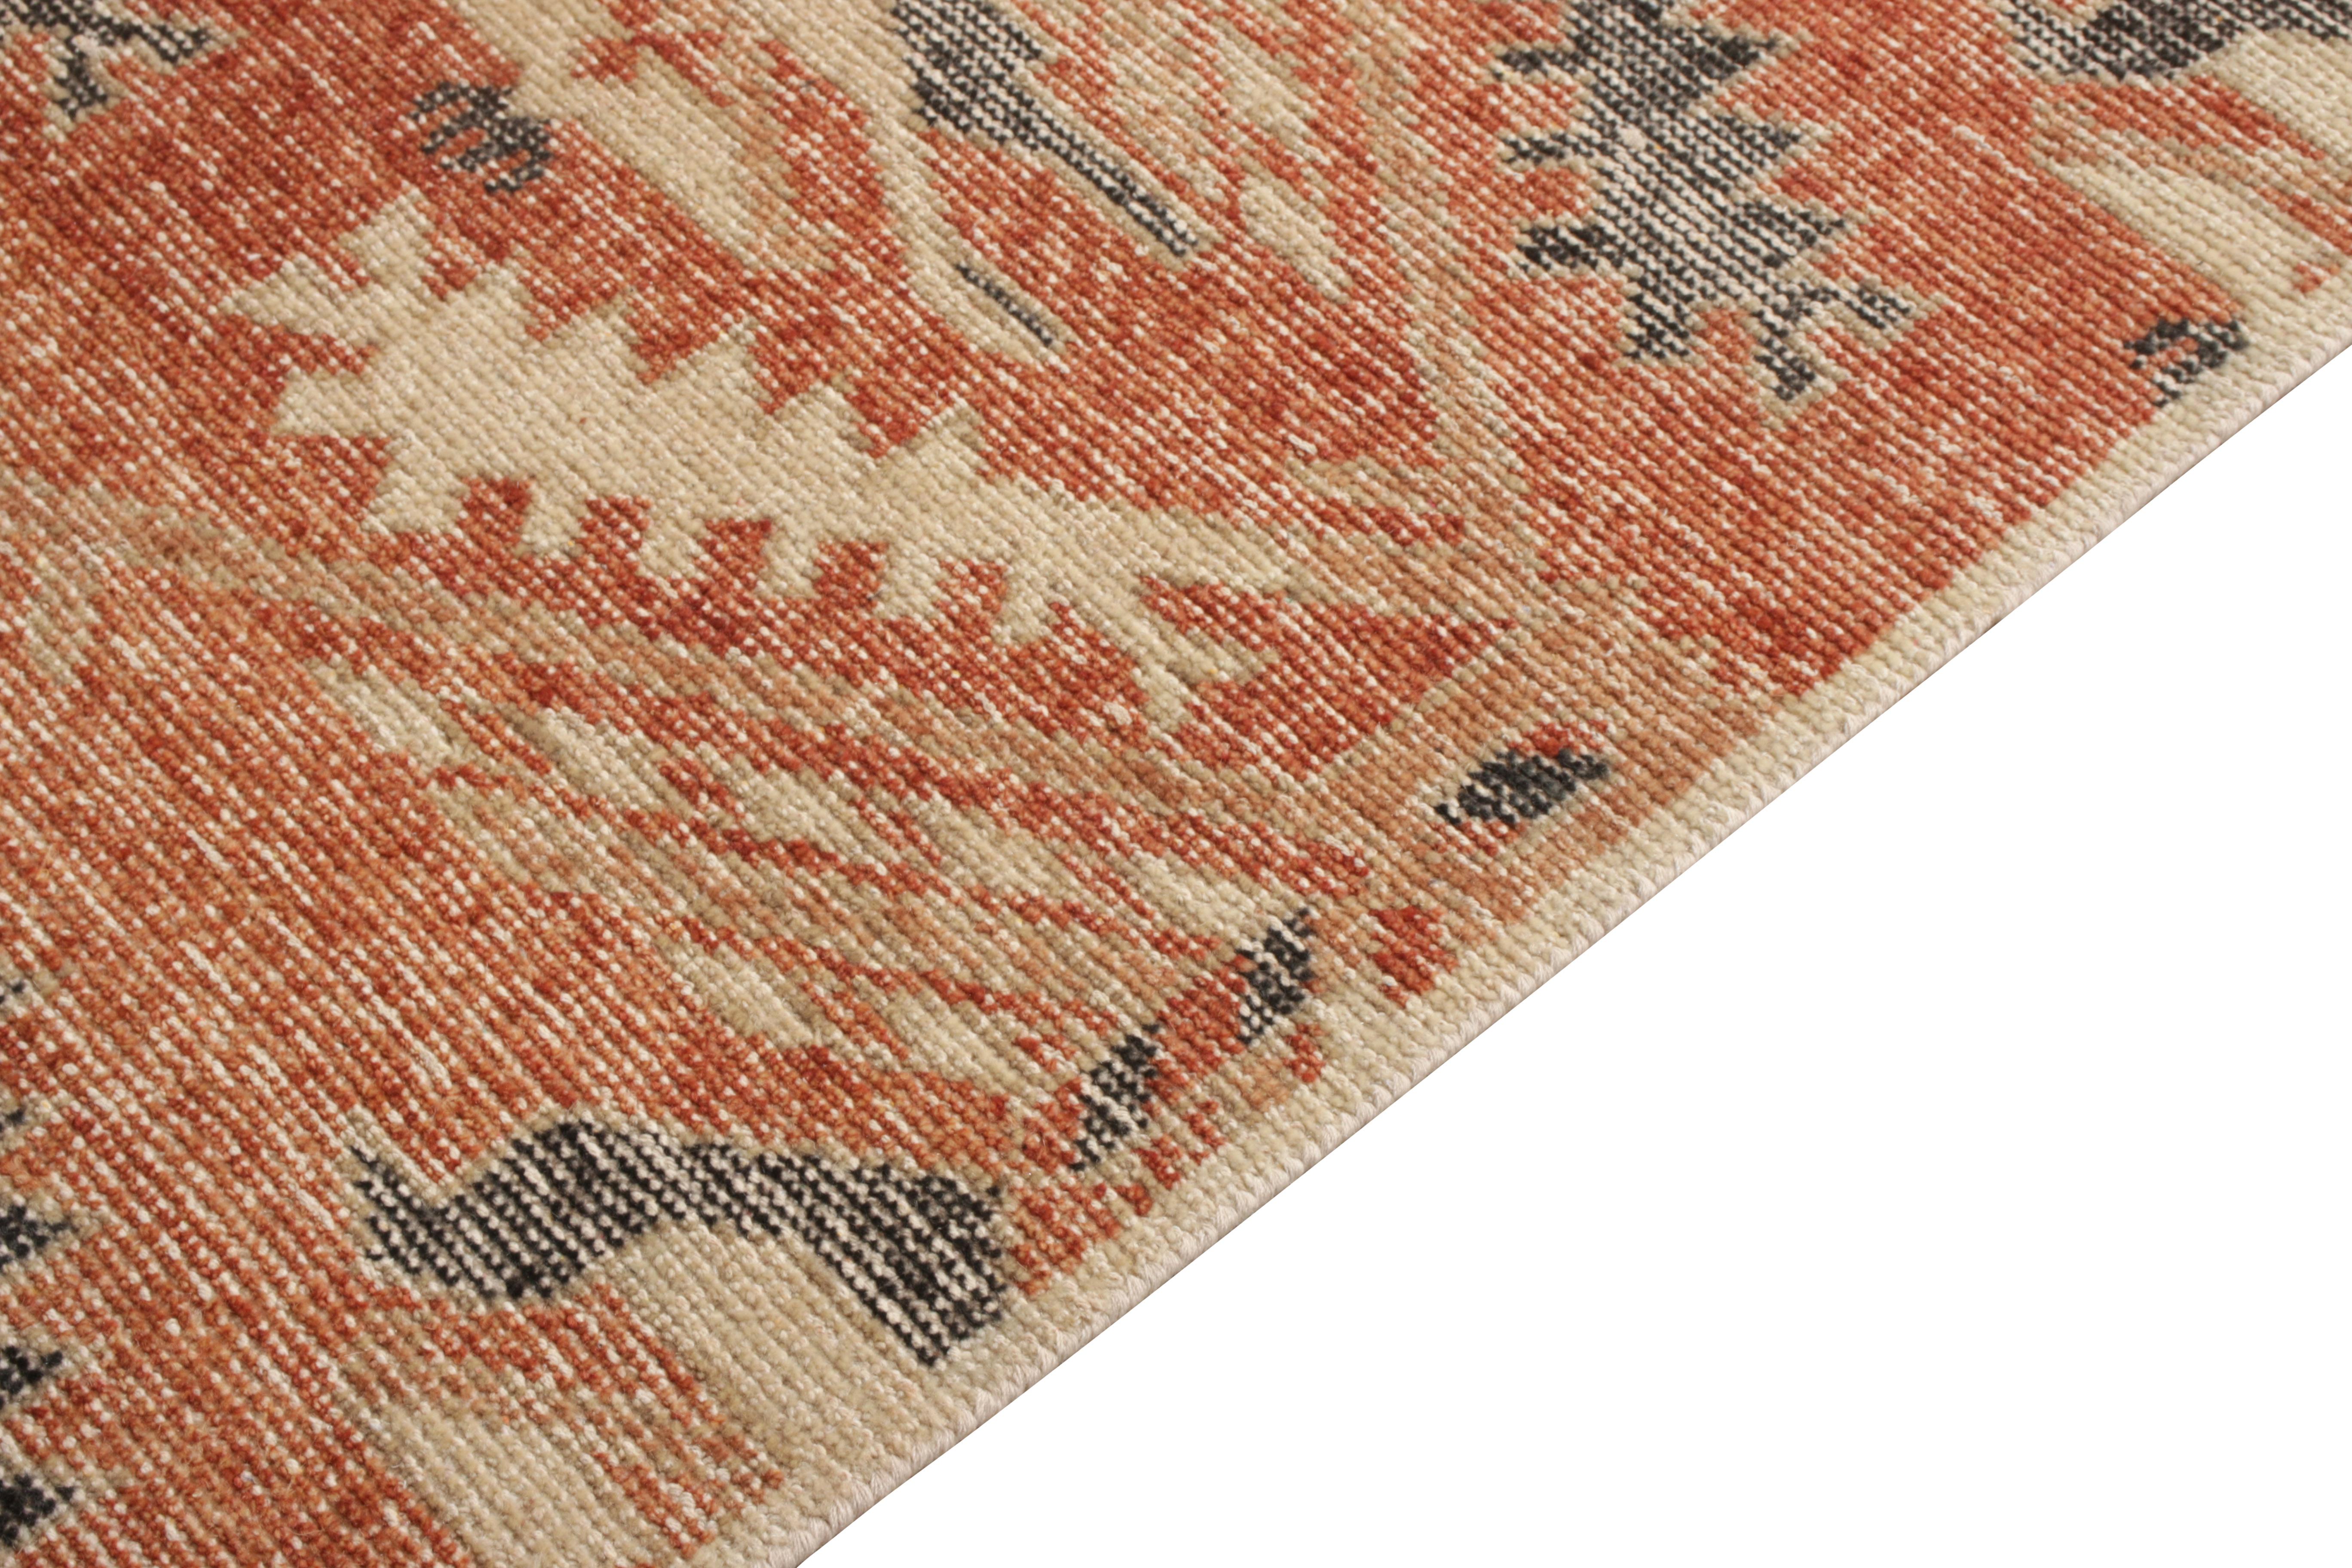 Indian Rug & Kilim’s Distressed Style Runner in Orange-Red, Blue Geometric Pattern For Sale